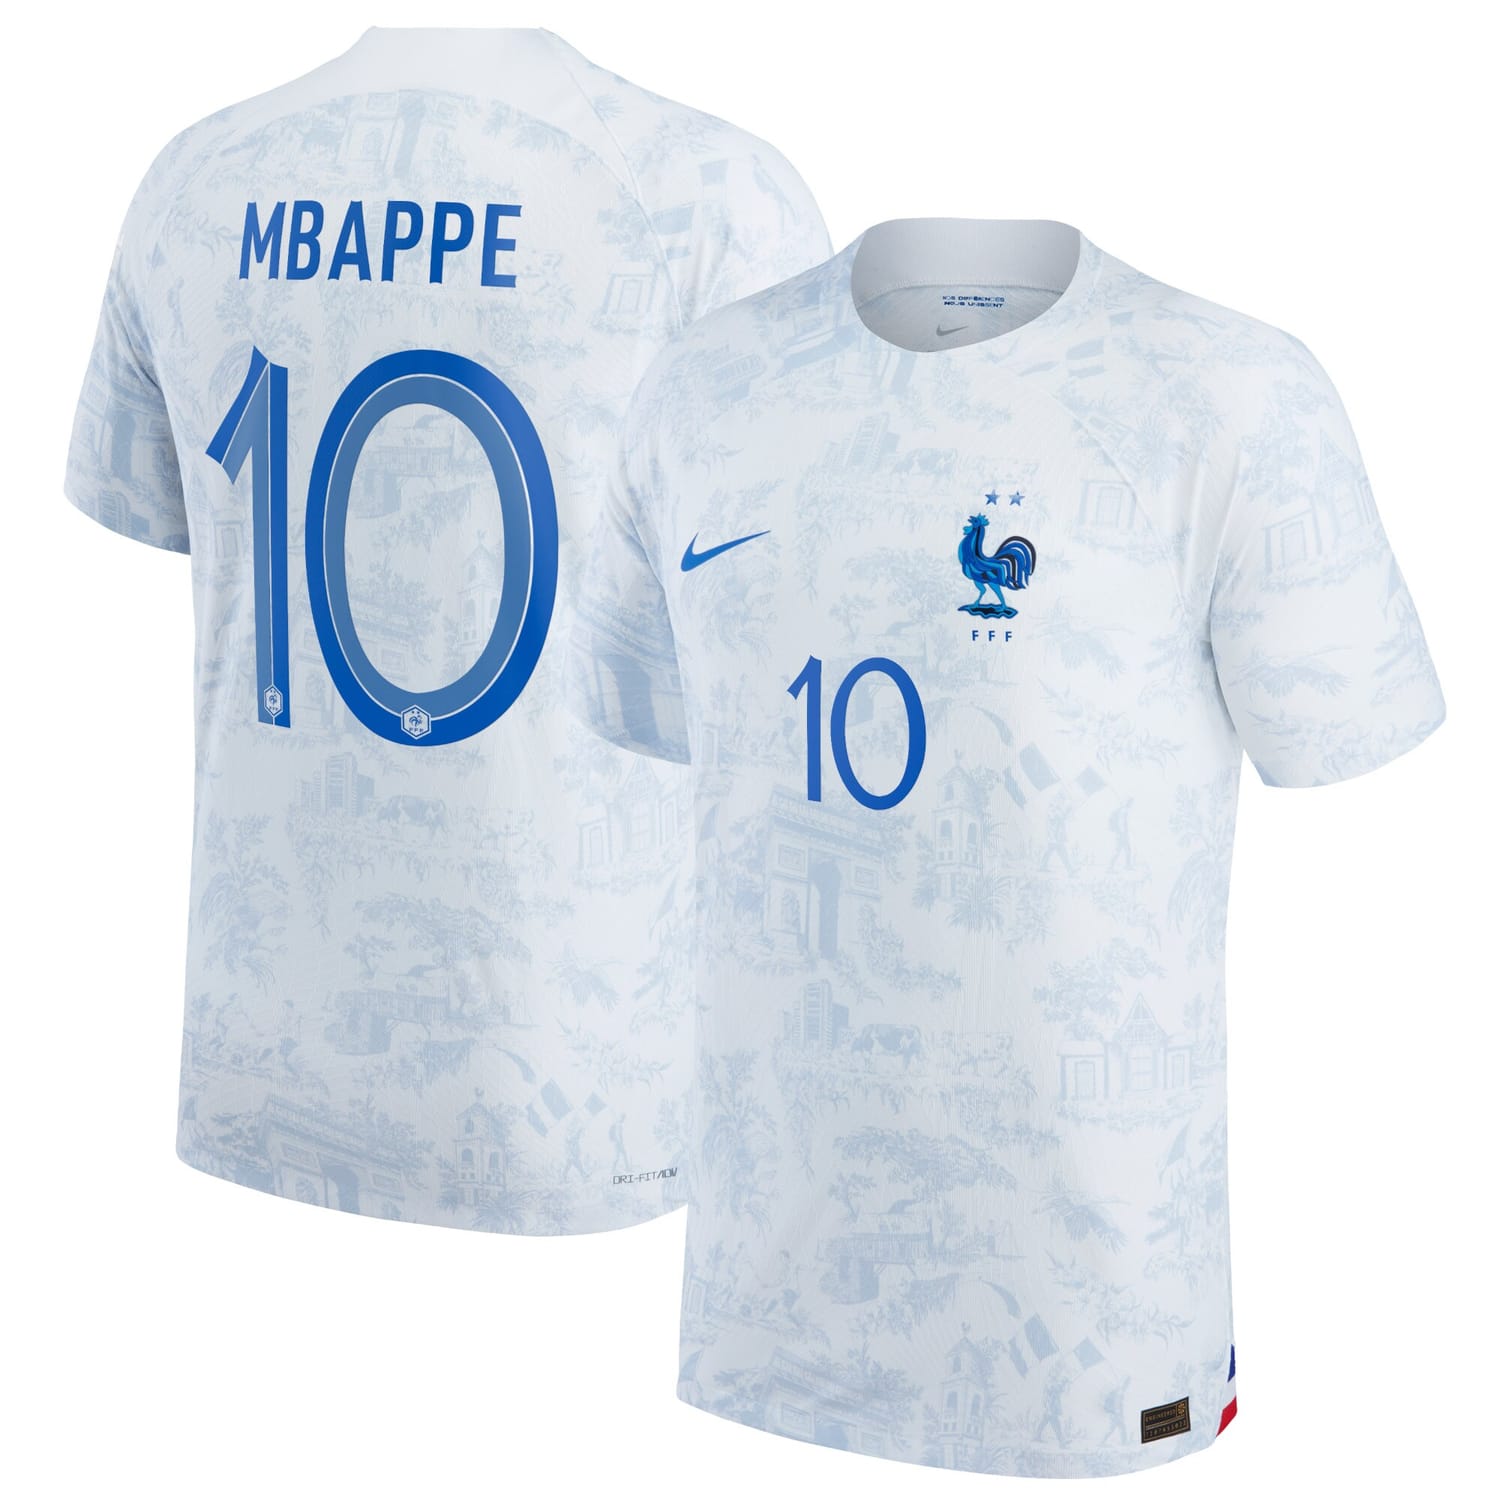 France National Team Away Authentic Jersey Shirt 2022 player Kylian Mbappe printing for Men